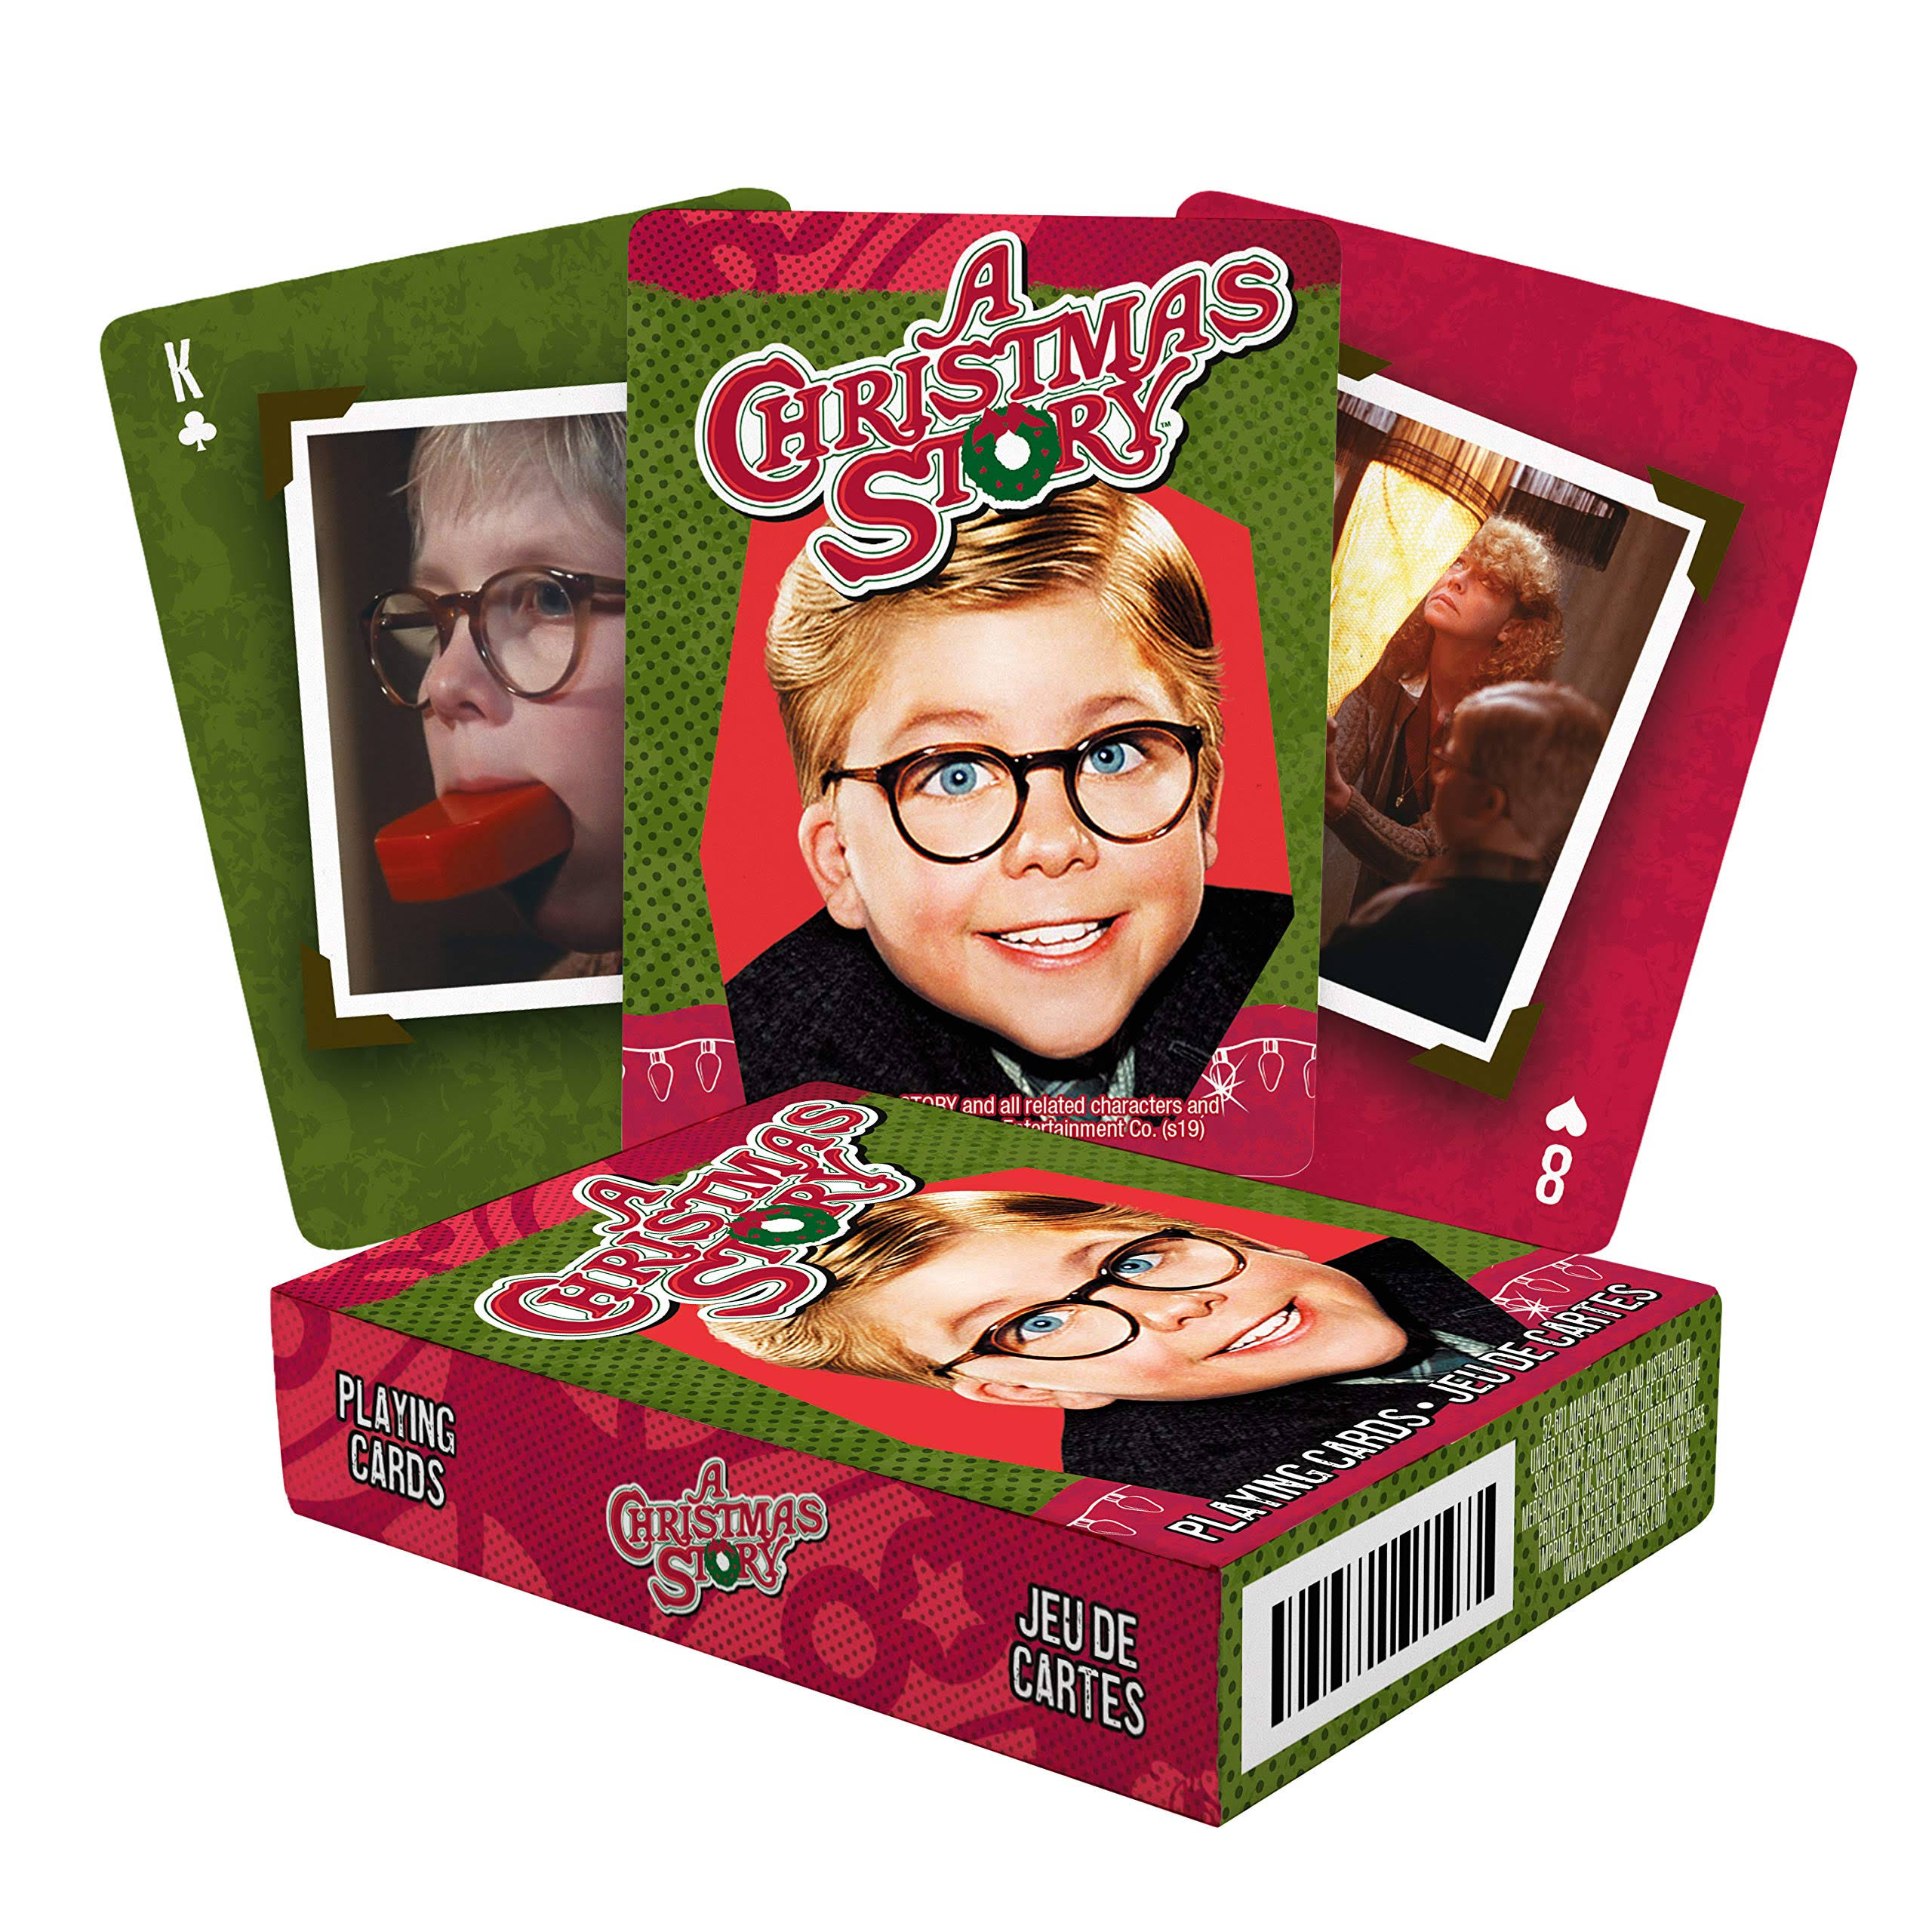 A Christmas Story Photos Playing Cards